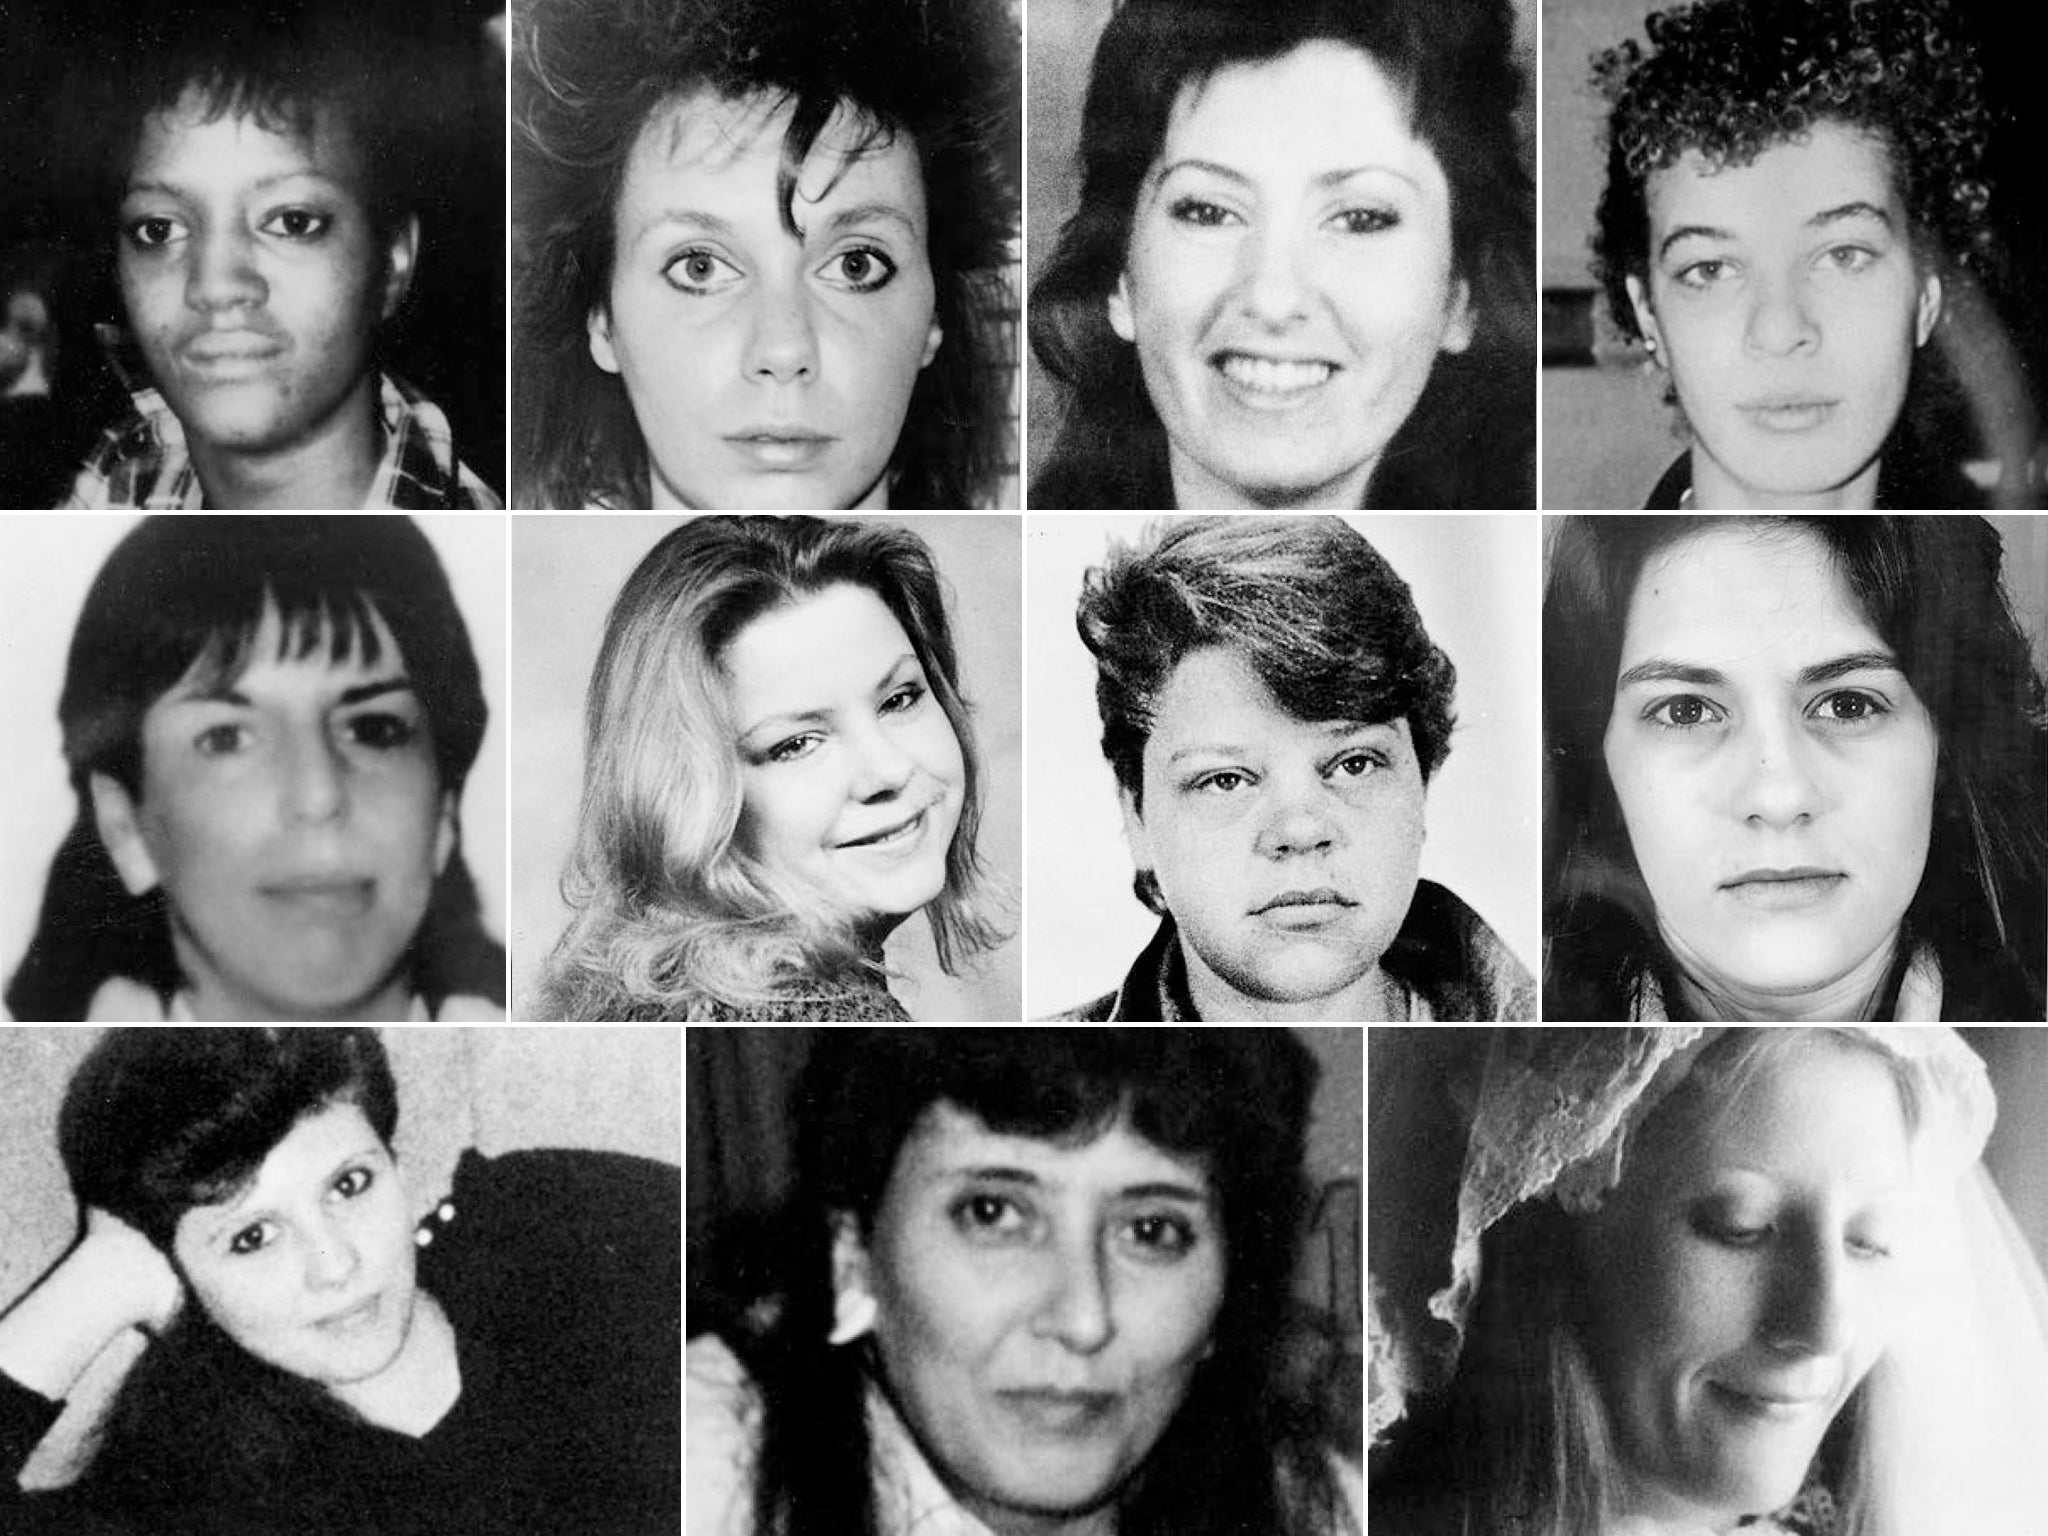 The New Bedford Highway Serial Killer is believed to have killed at least eleven women; nine were found dumped along major roads near the Massachusetts city around 1988/89